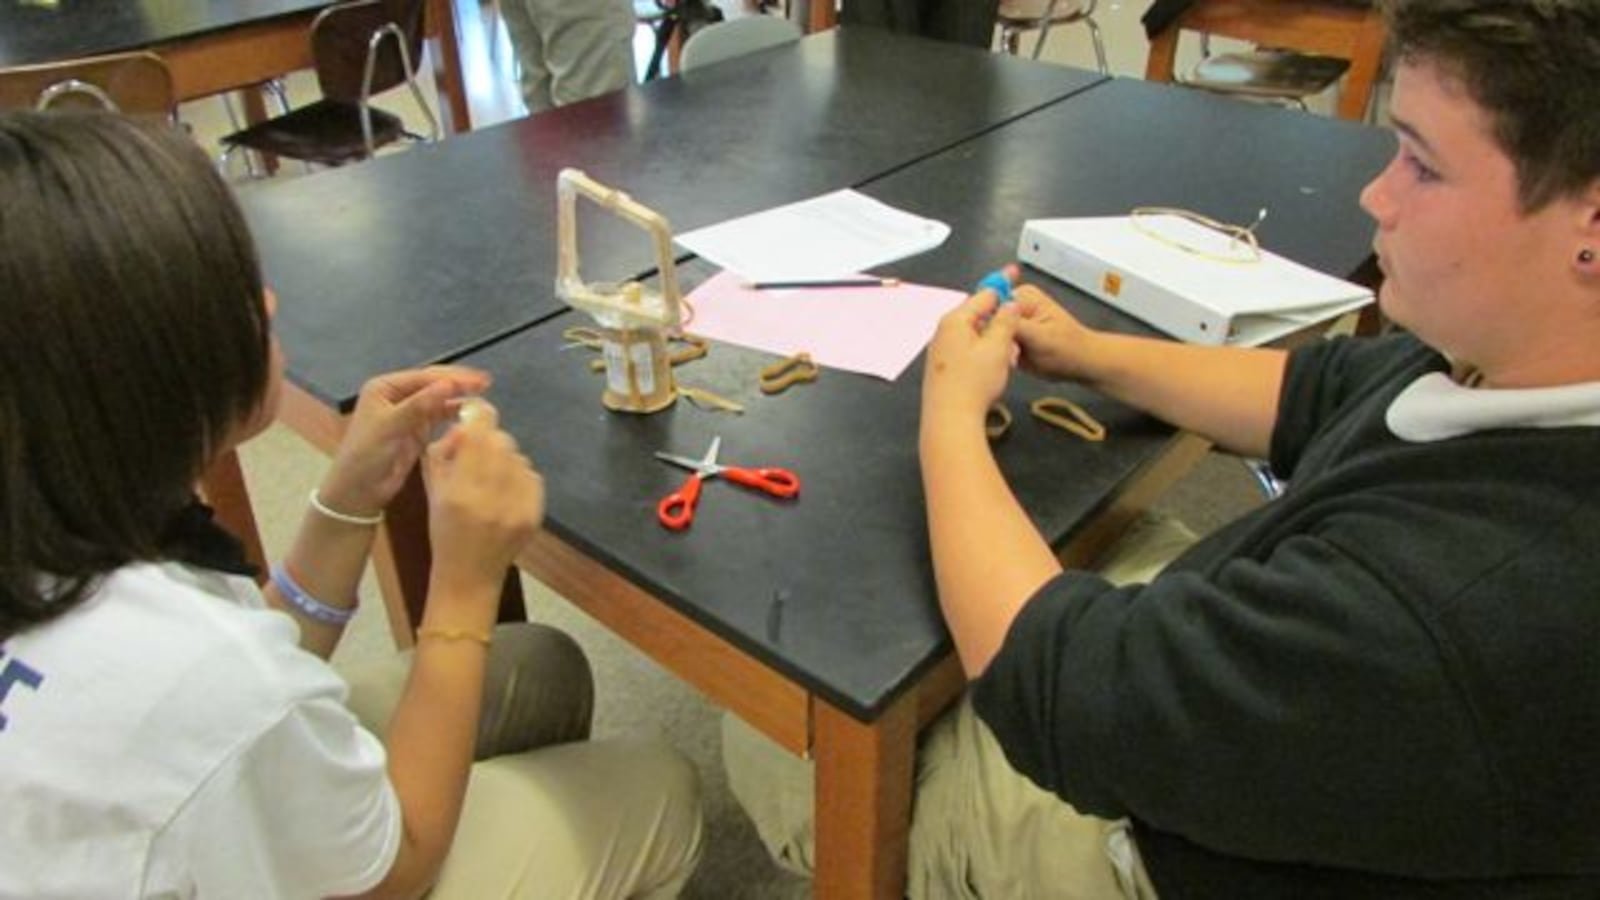 Students at Harshman Middle School, where Jack Hesser is a teacher, work on science projects.